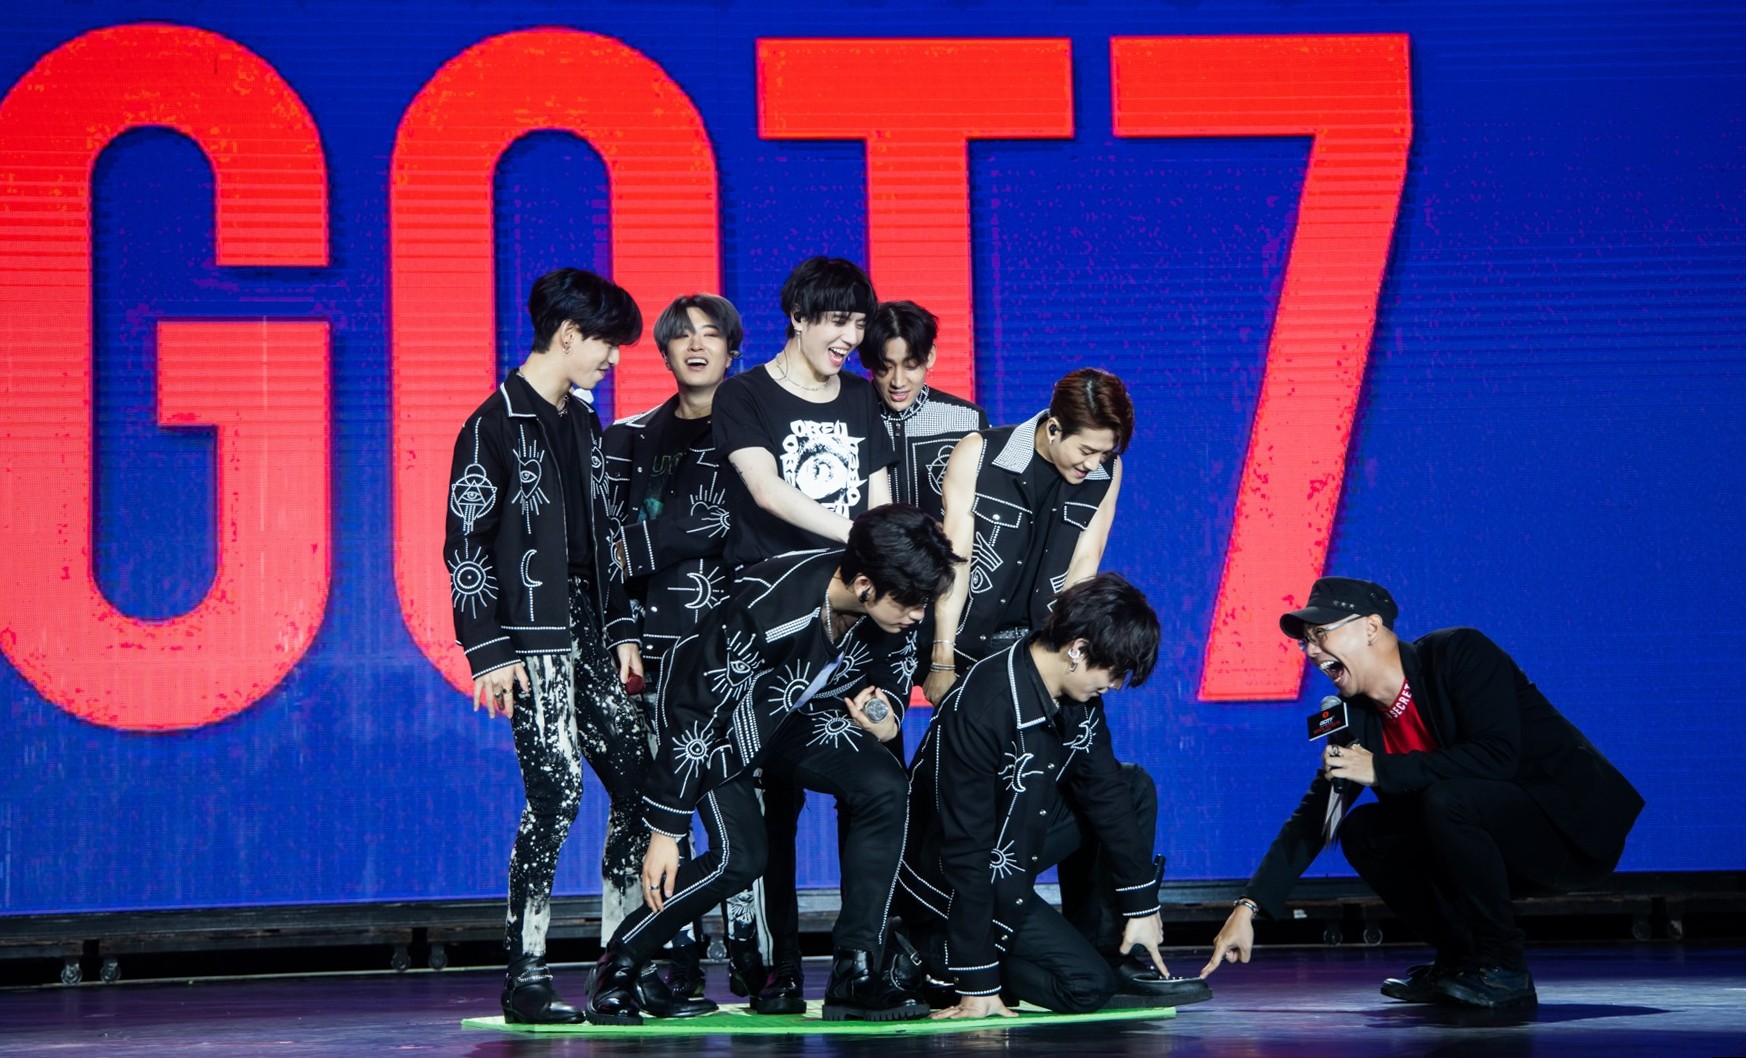 Boy band’s Got7’s concerts on August 31 and September 1 were postponed. Photo: Facebook